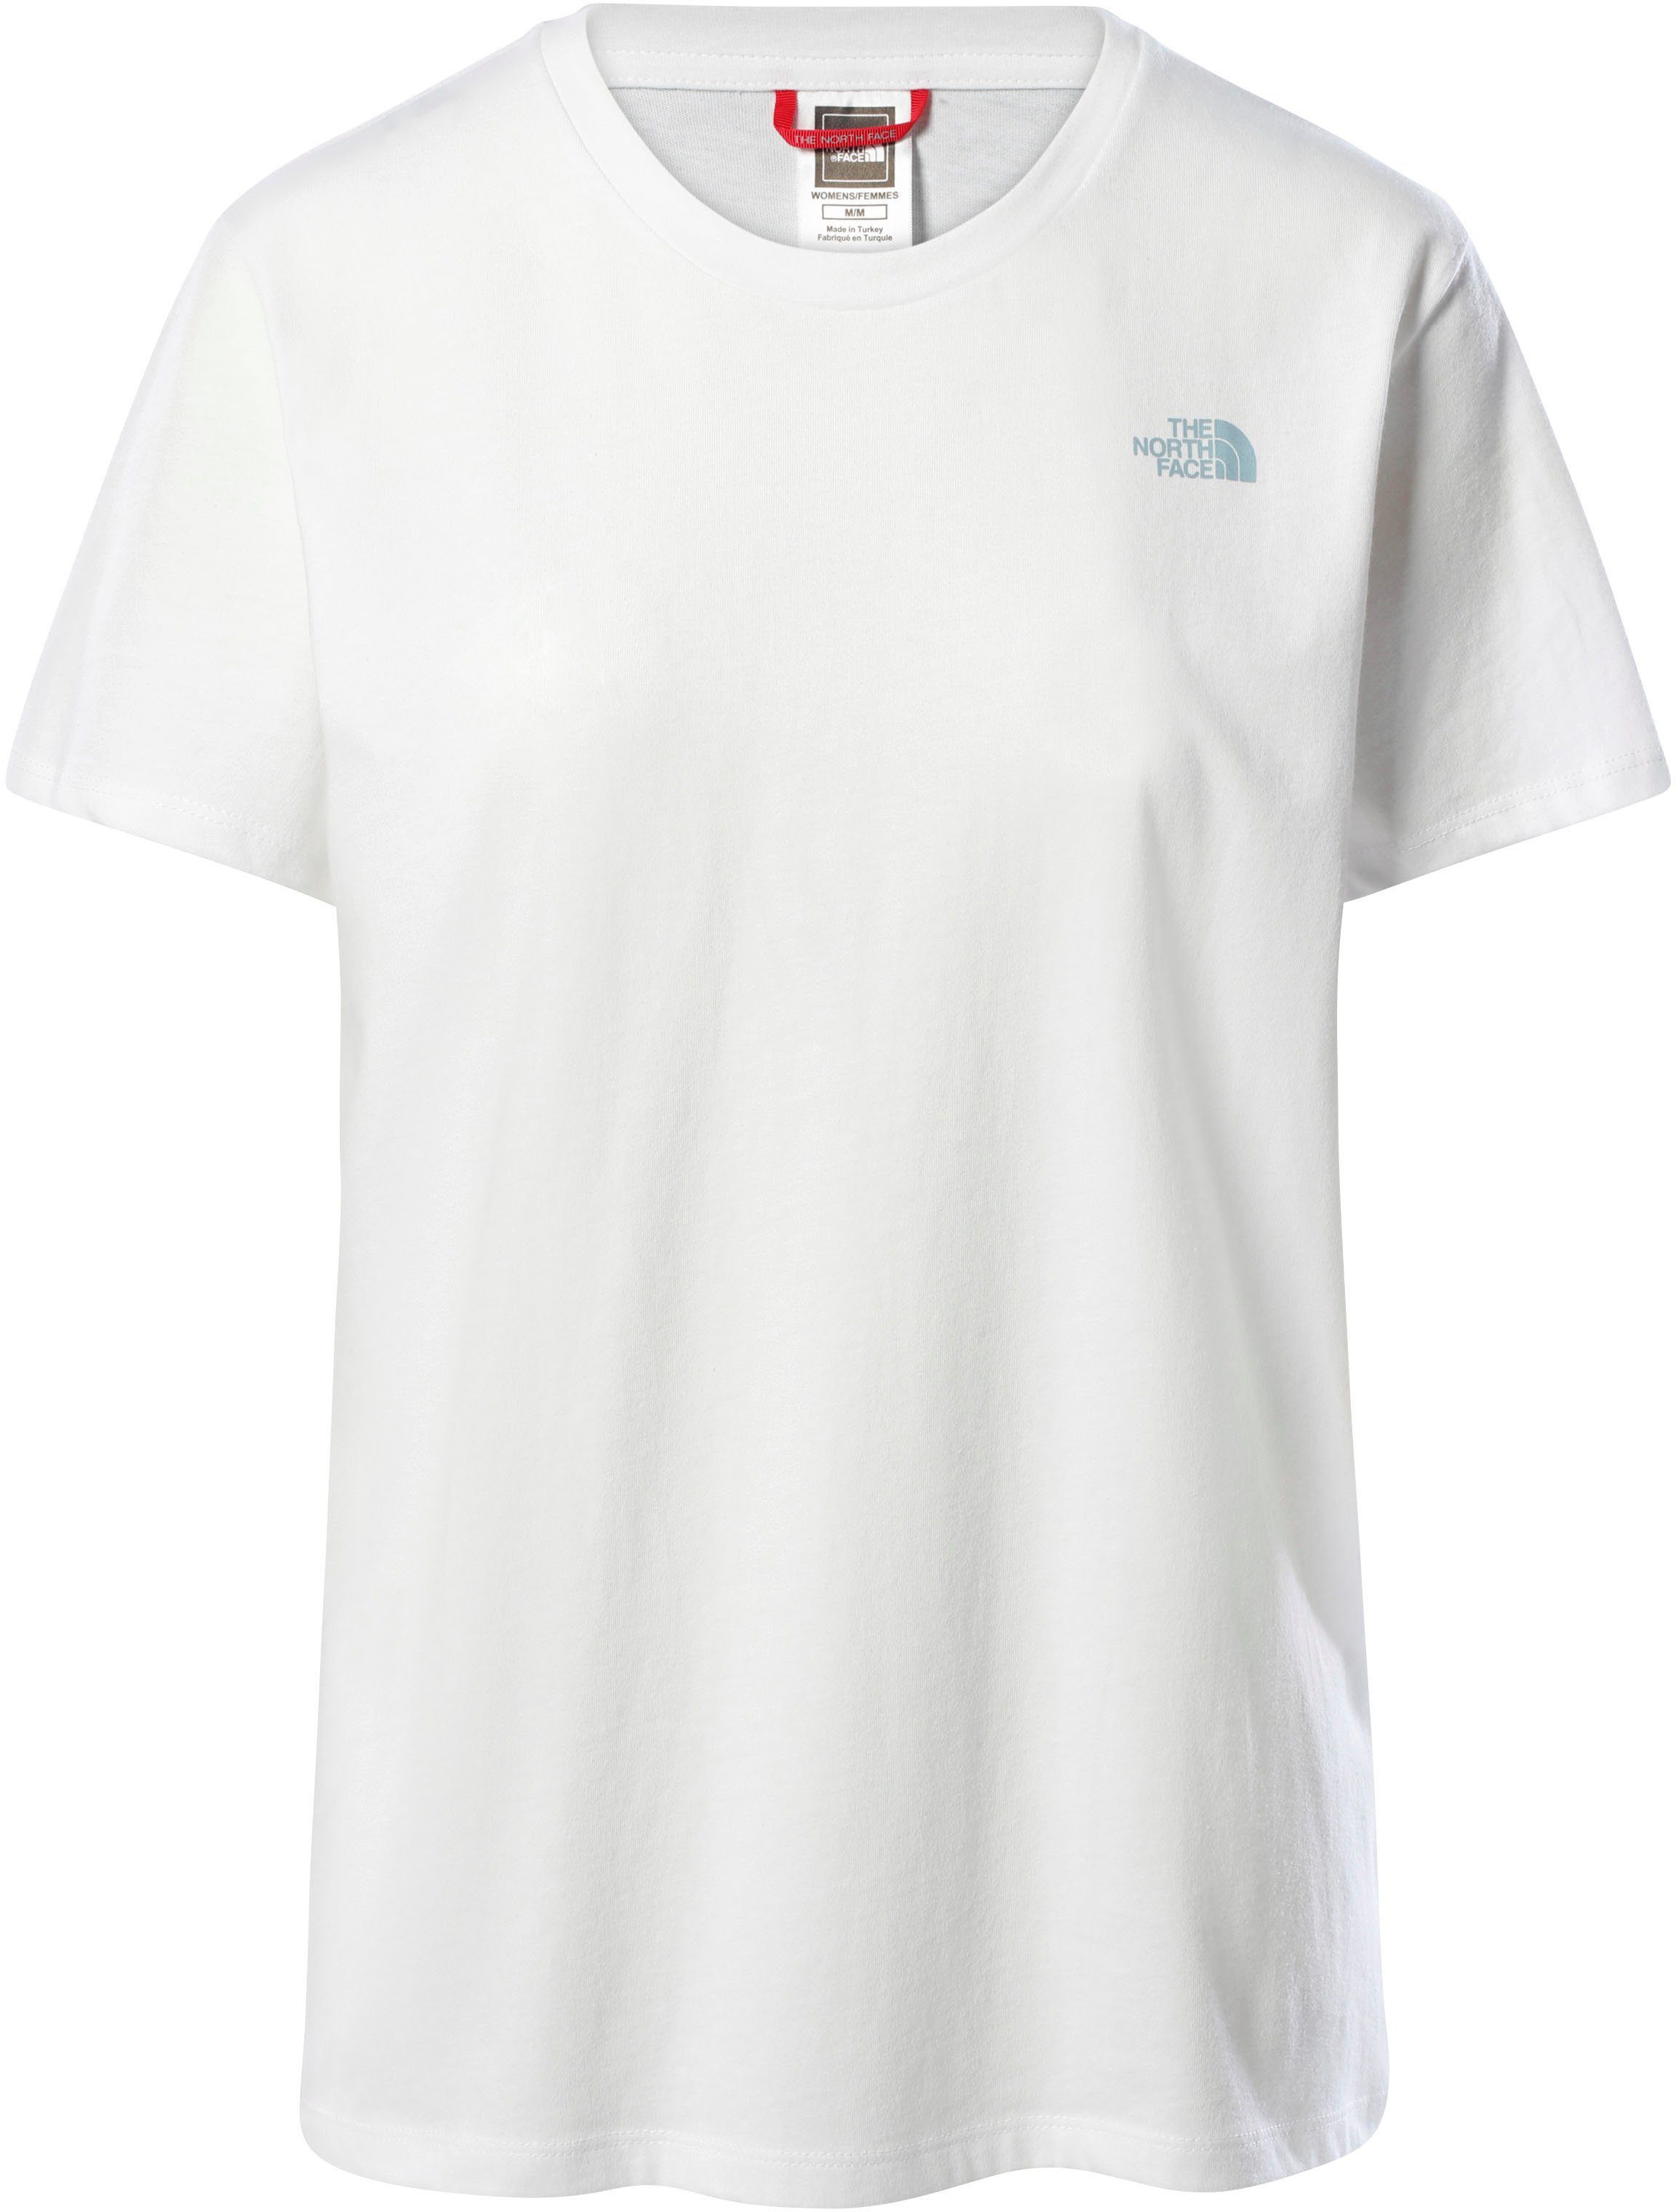 The North Face T-Shirt »CAMPAY« online kaufen | OTTO